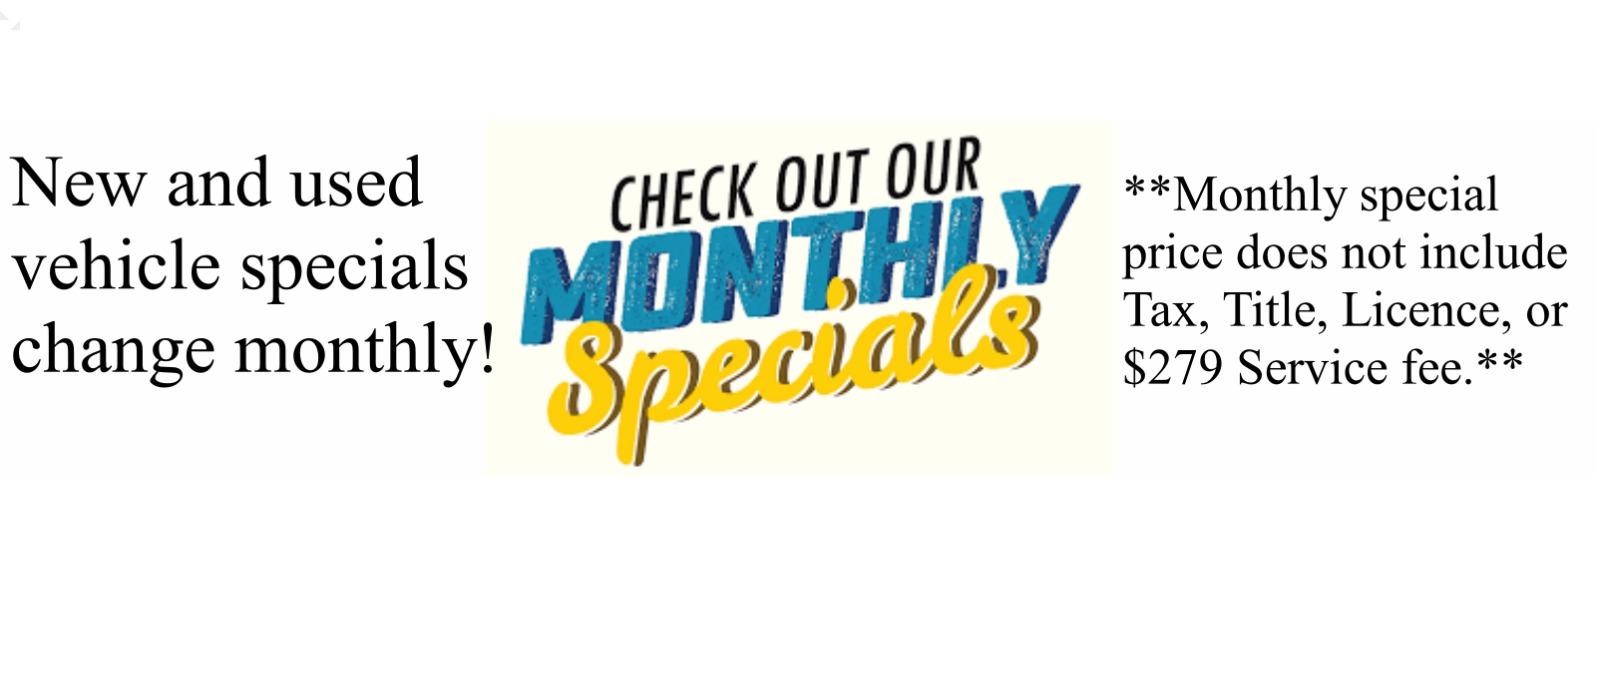 Monthly new and used vehicle specials